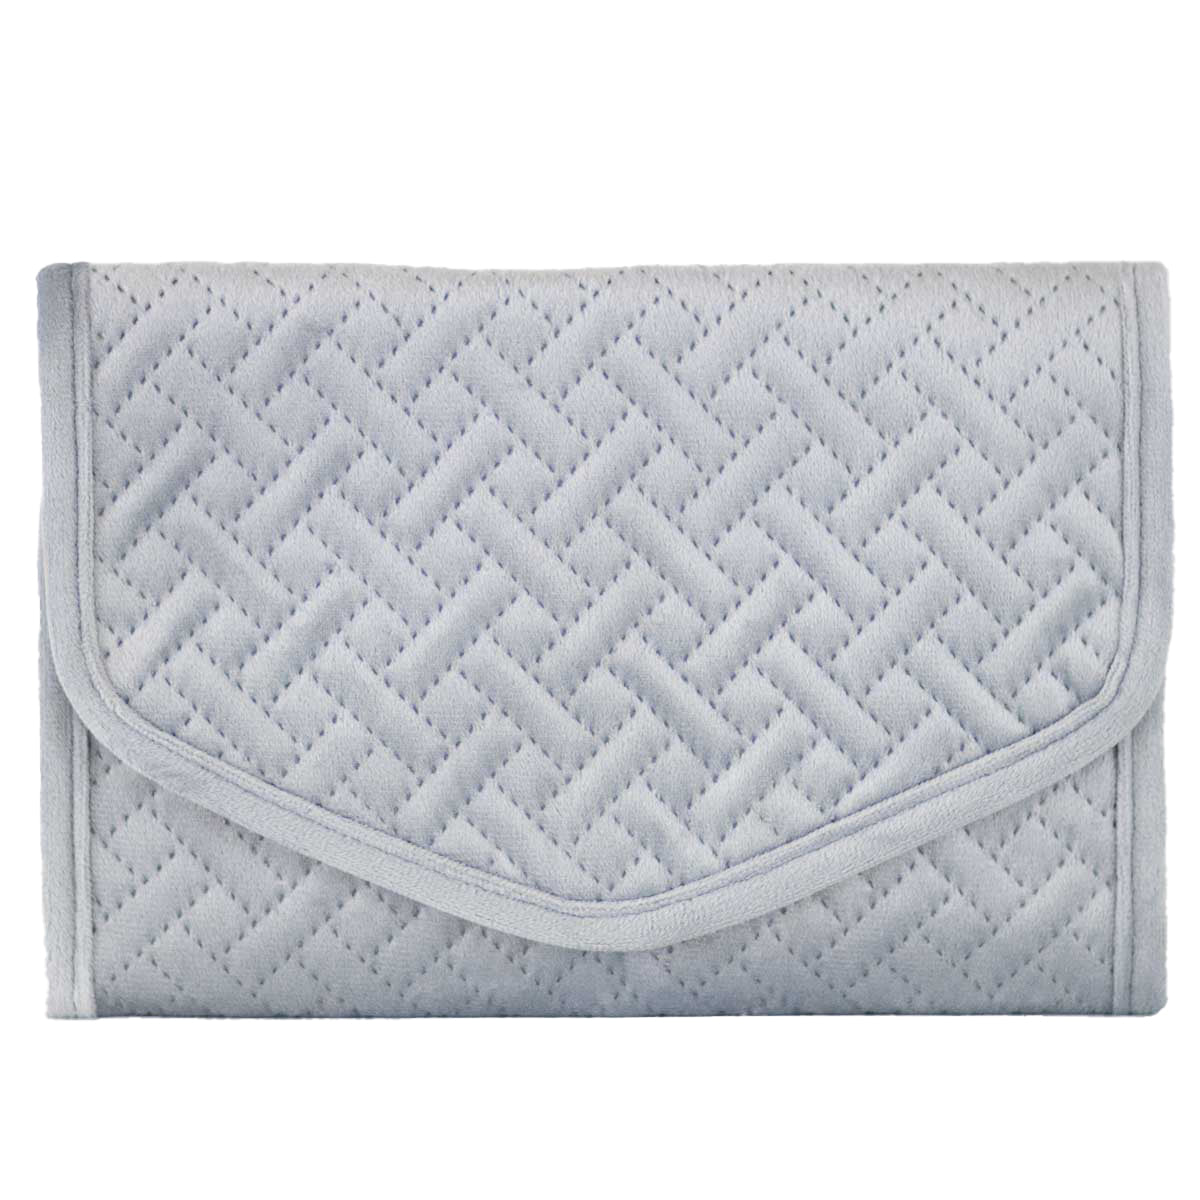 Quilted Jewelry Clutch in Slate